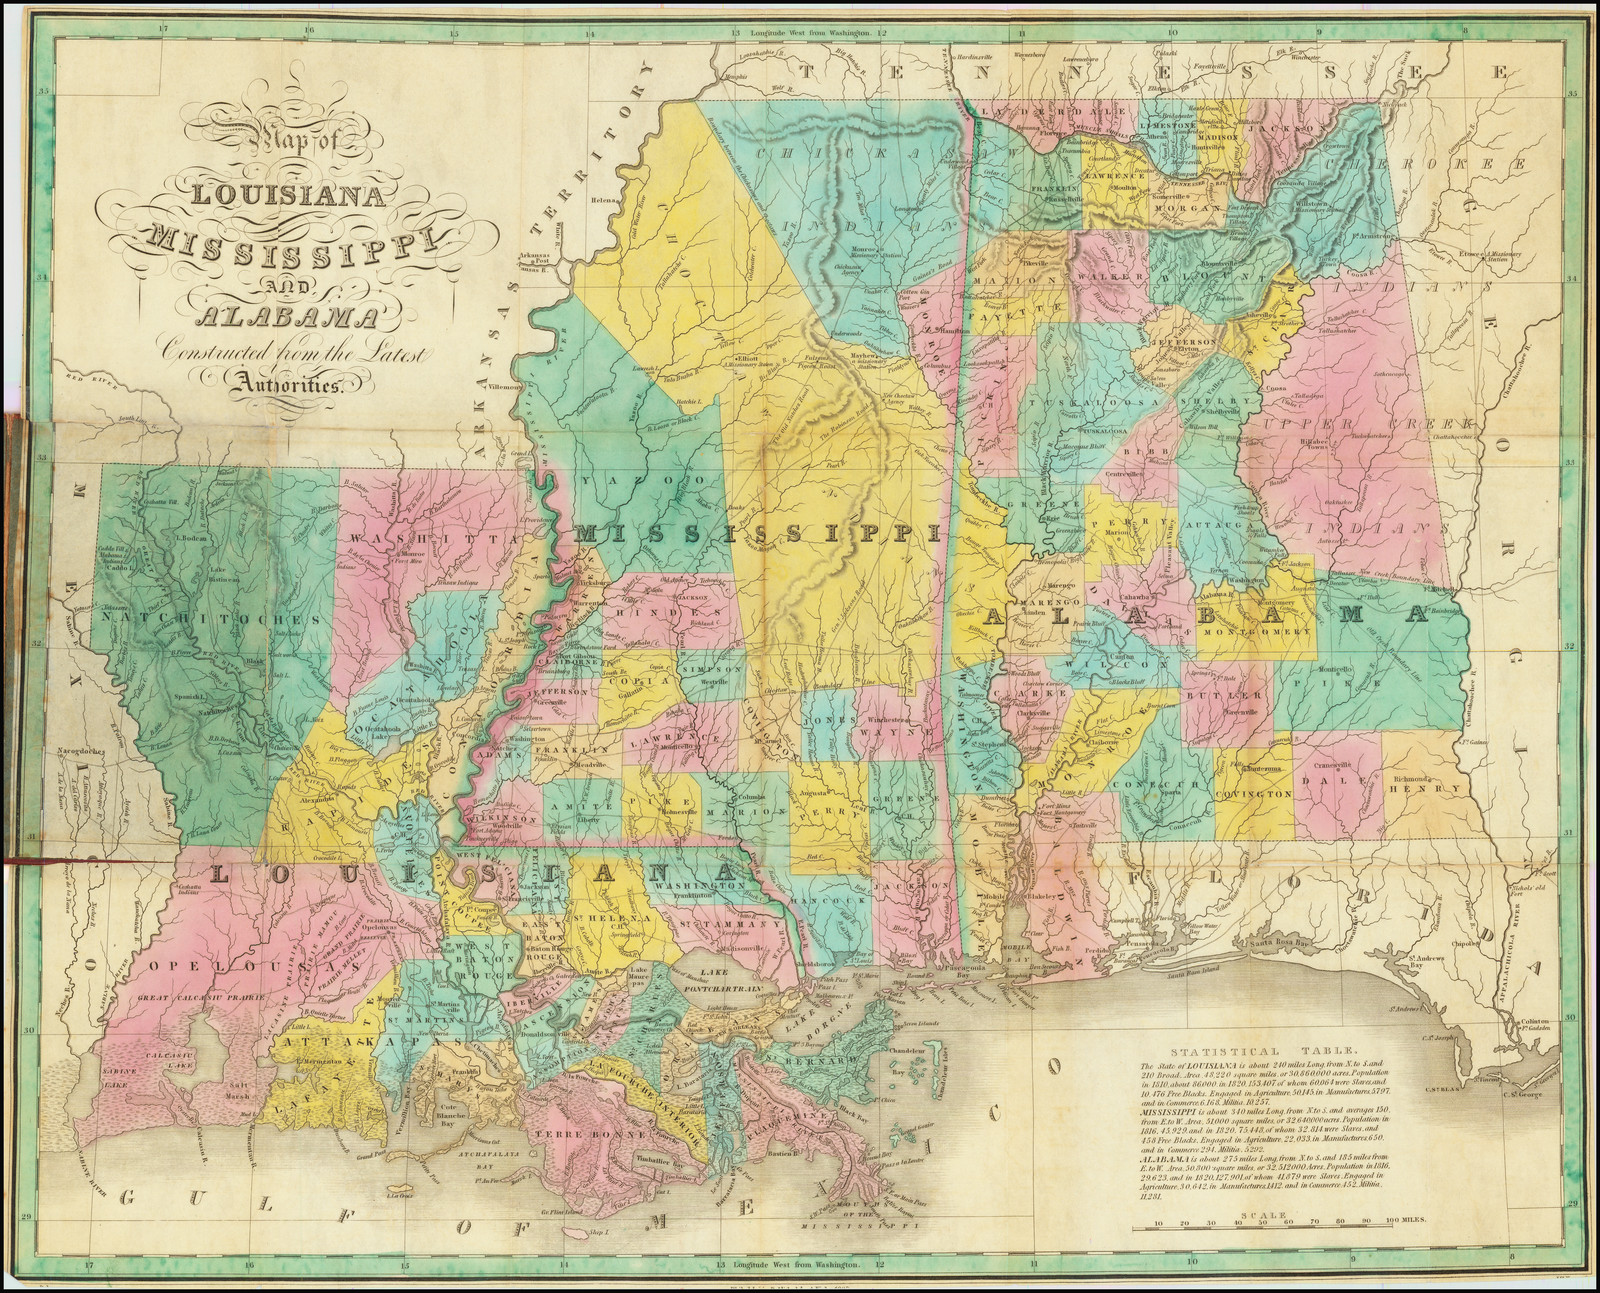 Map of Louisiana, Mississippi and Alabama, Constructed From the Latest  Authorities - Barry Lawrence Ruderman Antique Maps Inc.